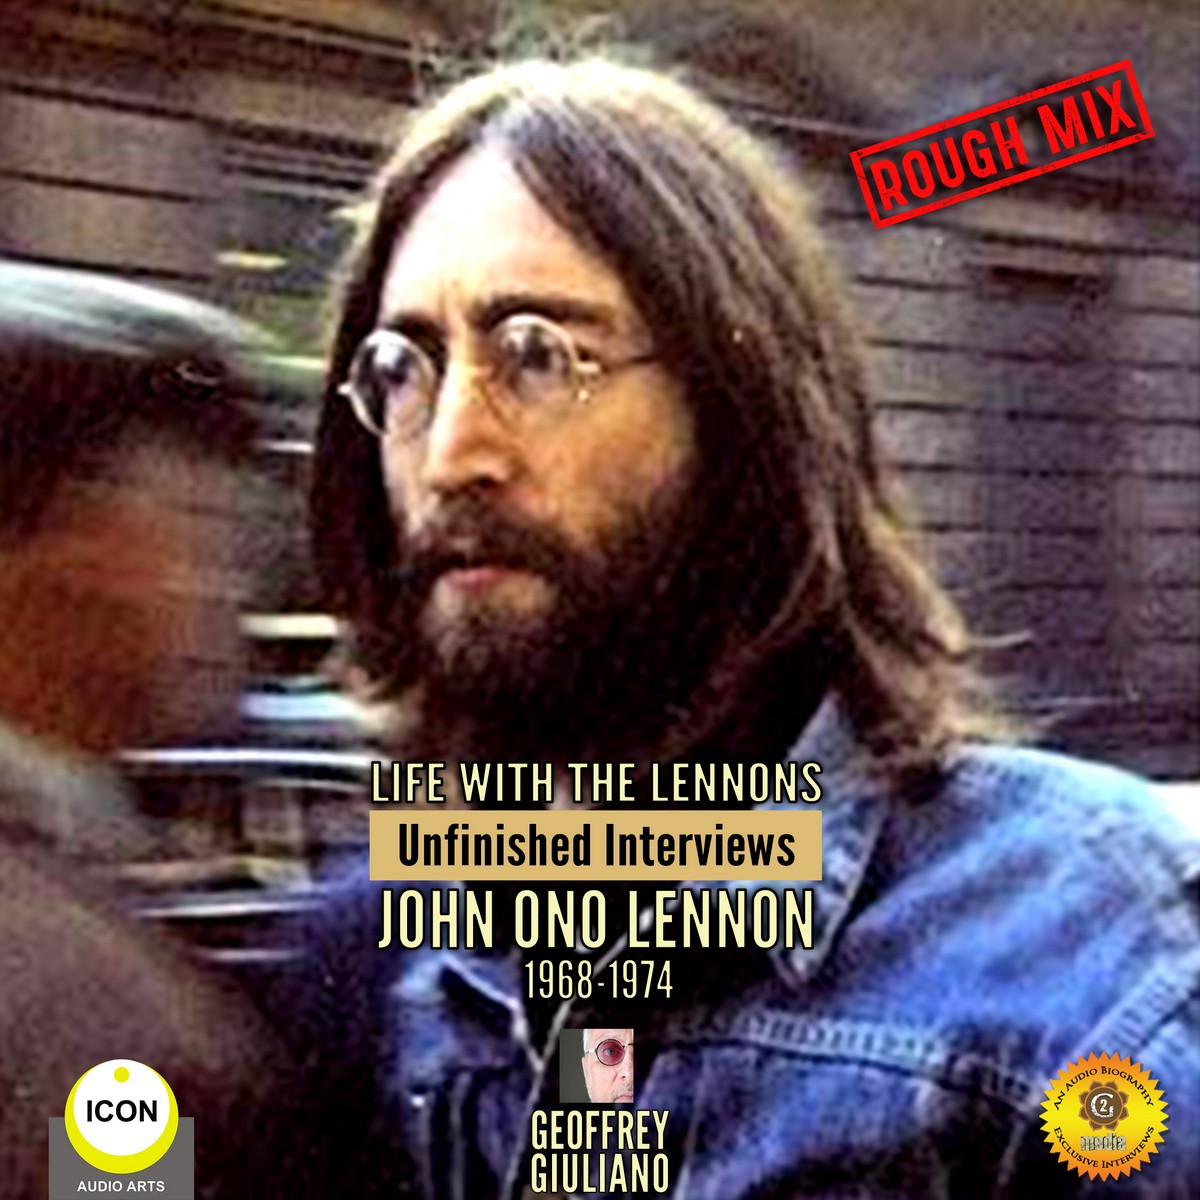 Life with the Lennons: Unfinished Interviews John Ono Lennon 1968-1974